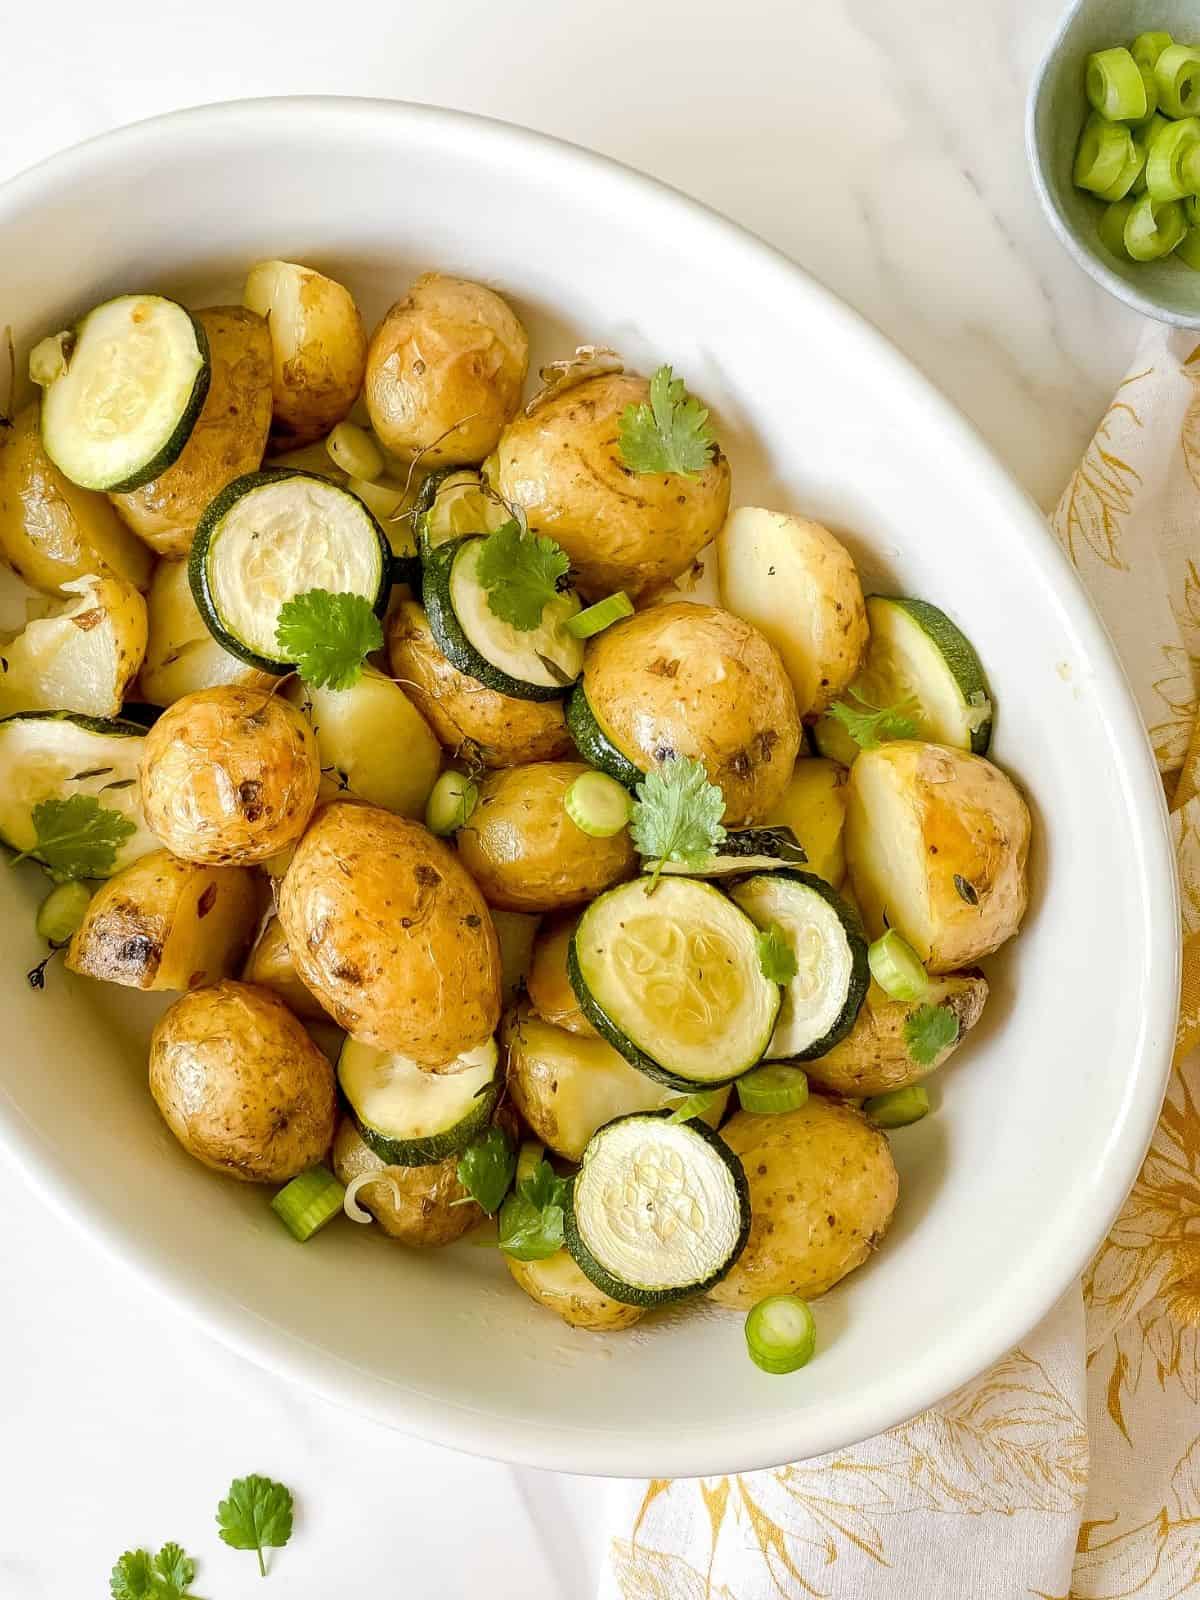 roasted potatoes and zucchini in a white dish on a patterned yellow cloth.